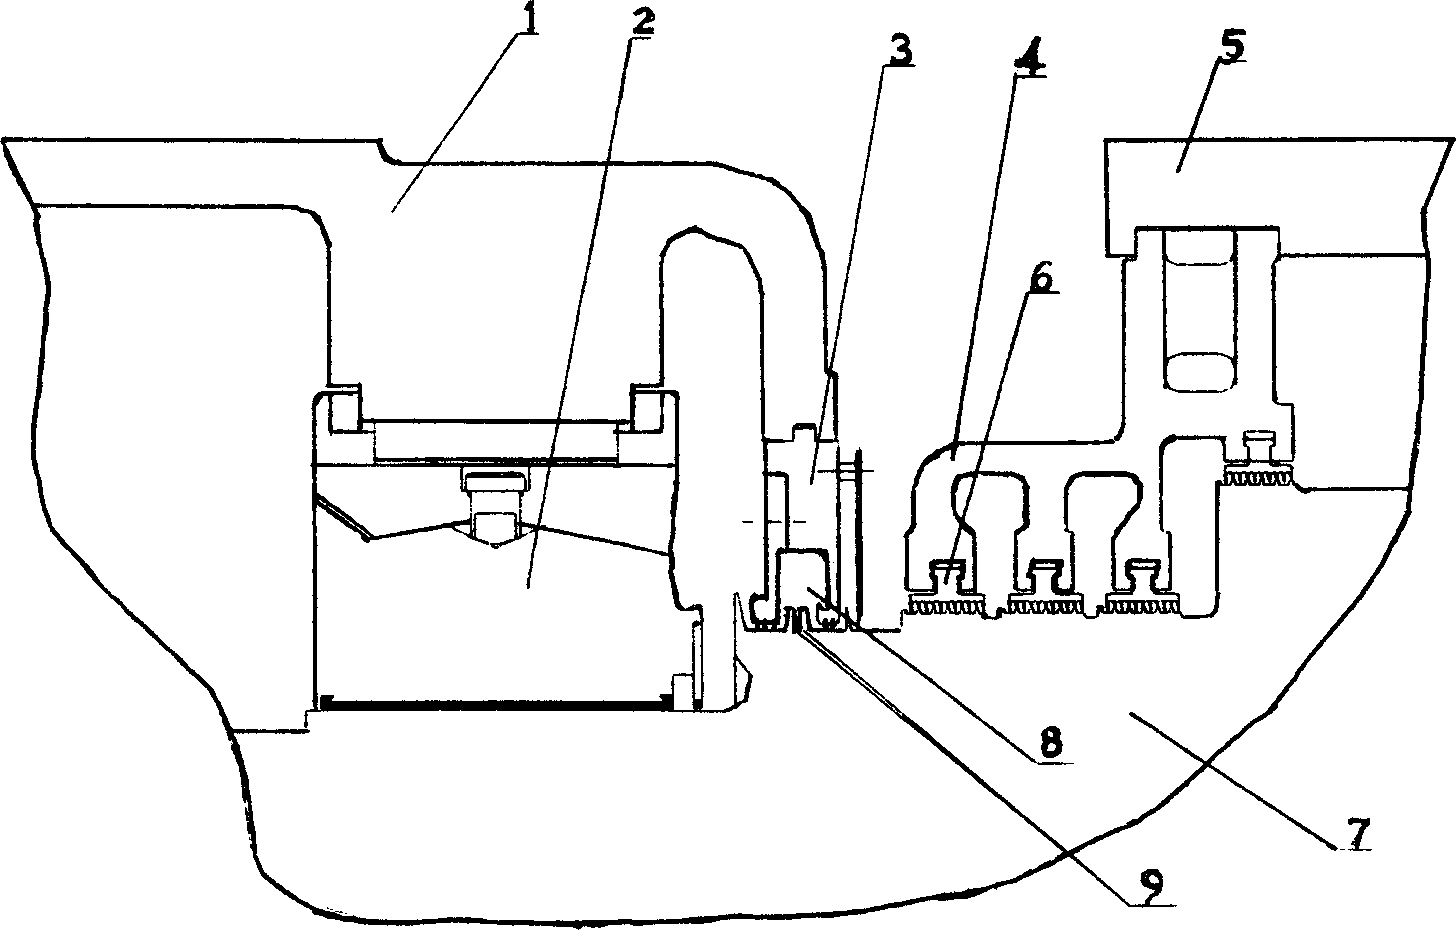 Structure for preventing water coming into turbine fuel and fuel leakaging